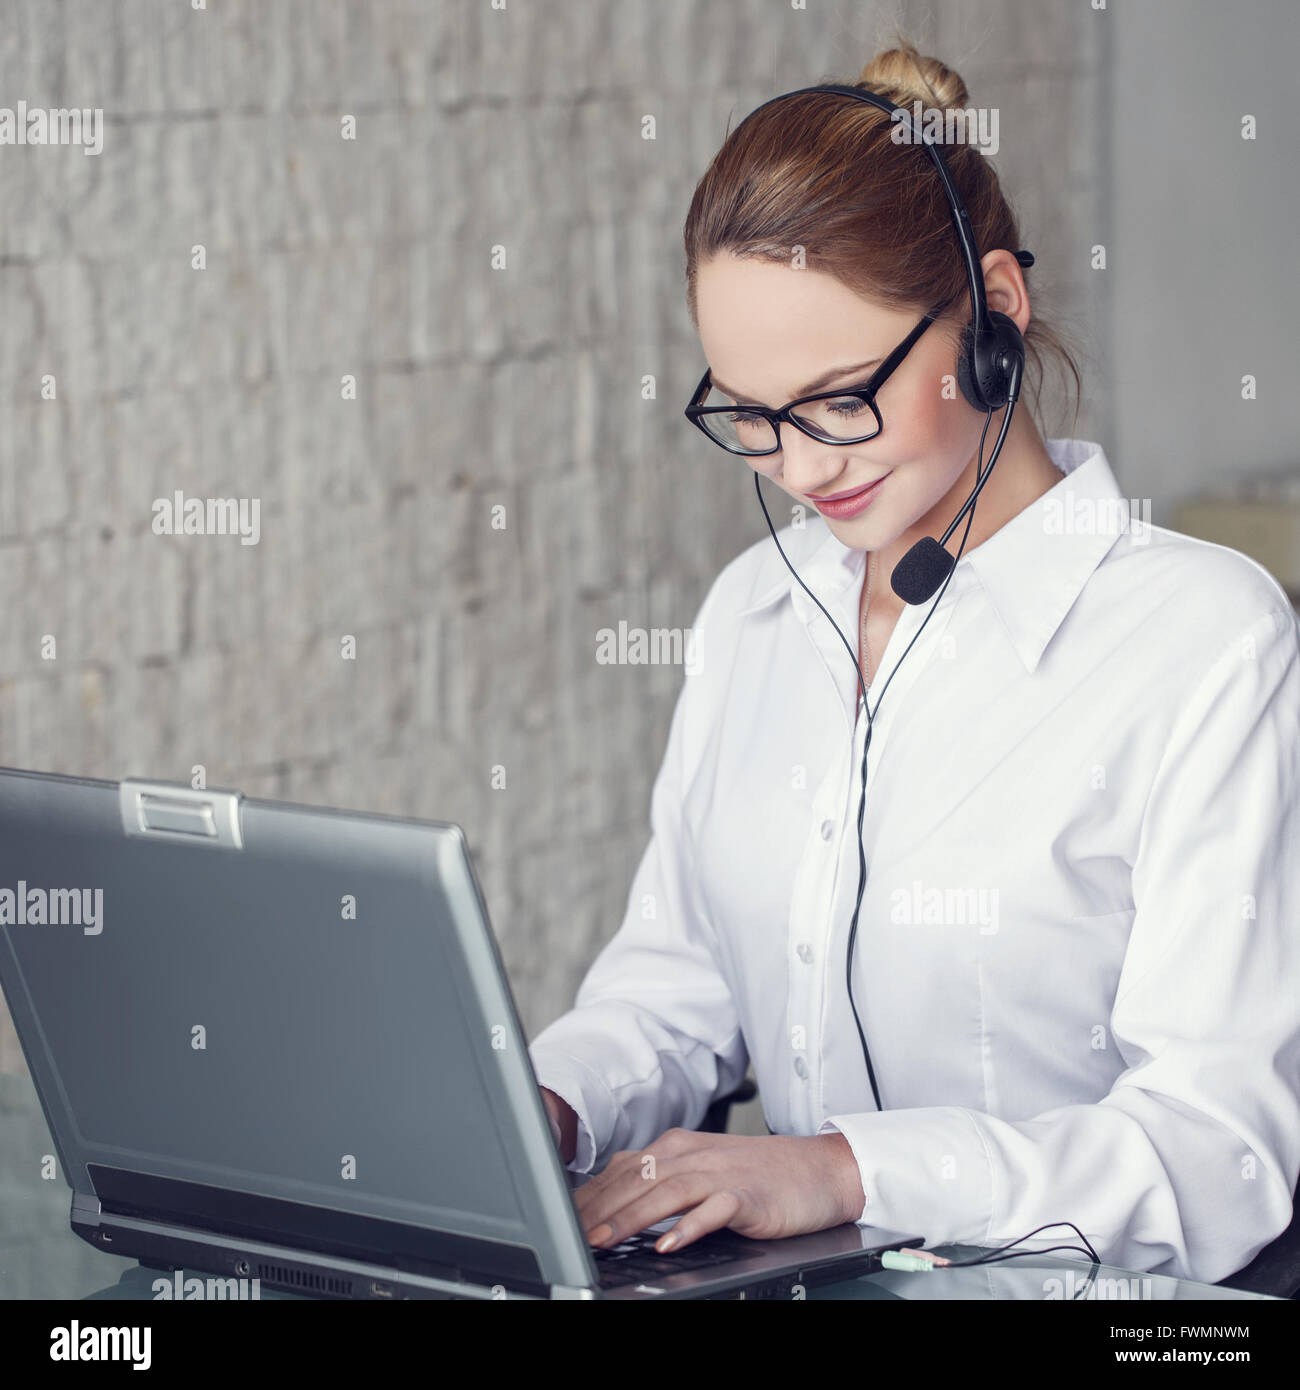 Customer support in office, young woman with headset Stock Photo